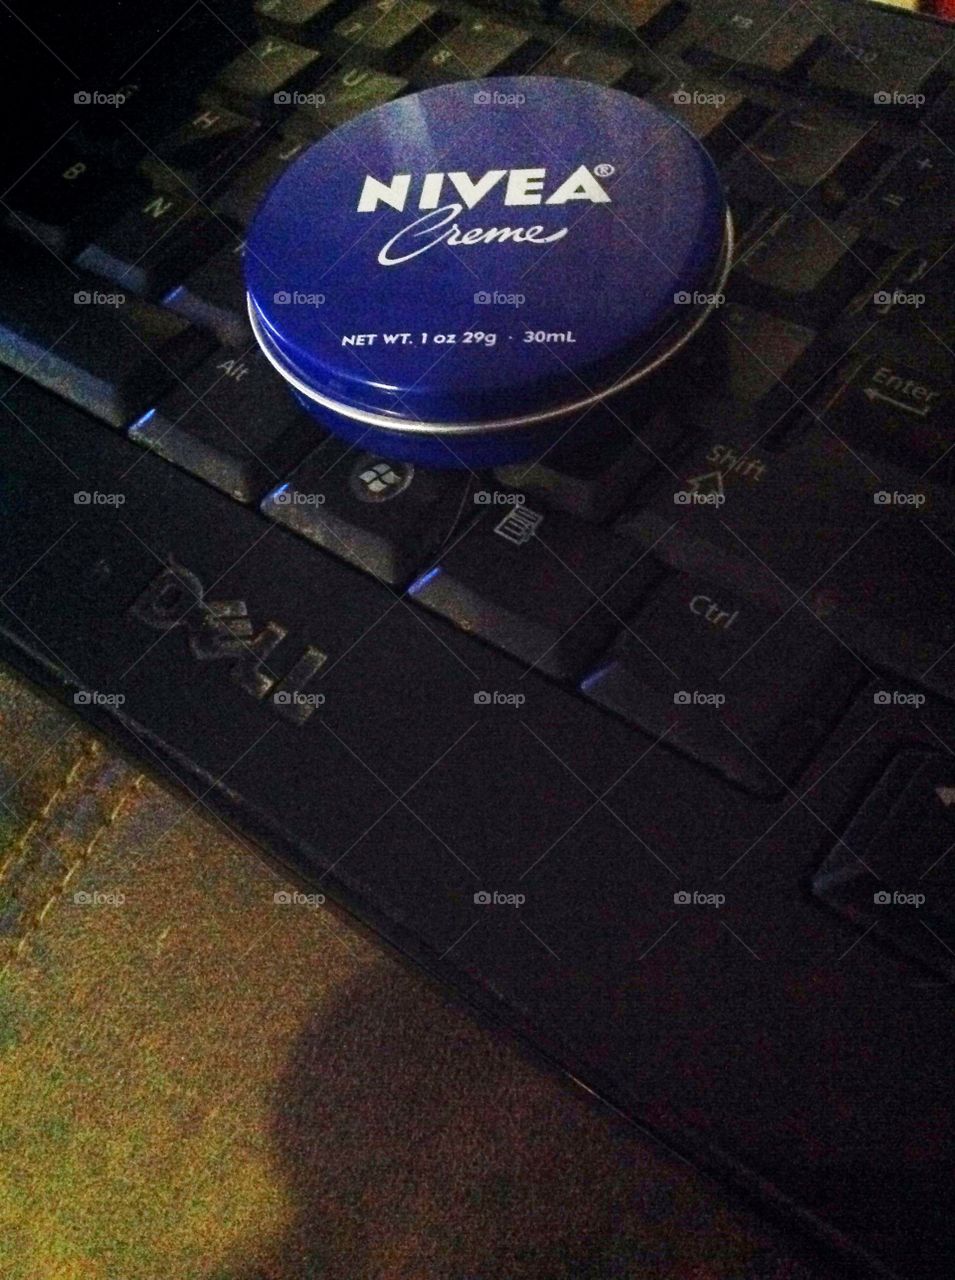 Work a home, Nivea to the rescue